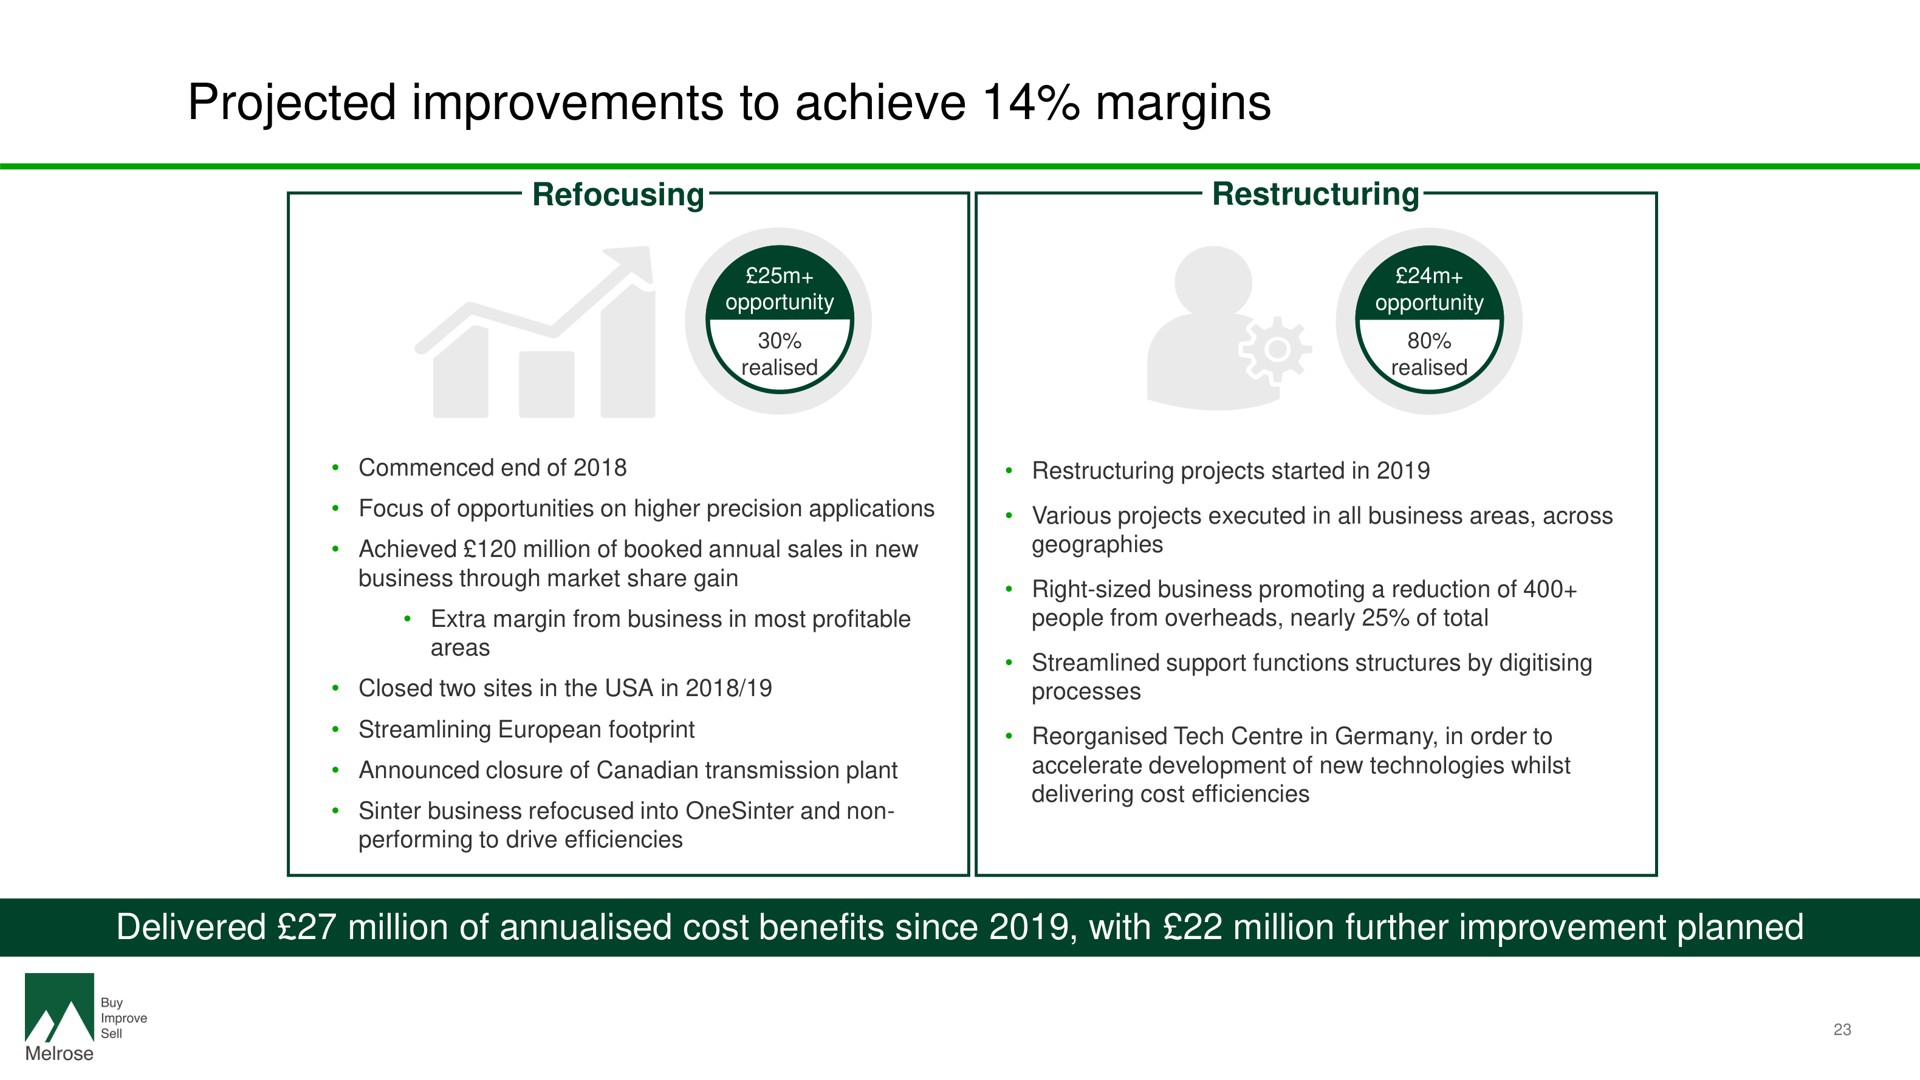 projected improvements to achieve margins | Melrose